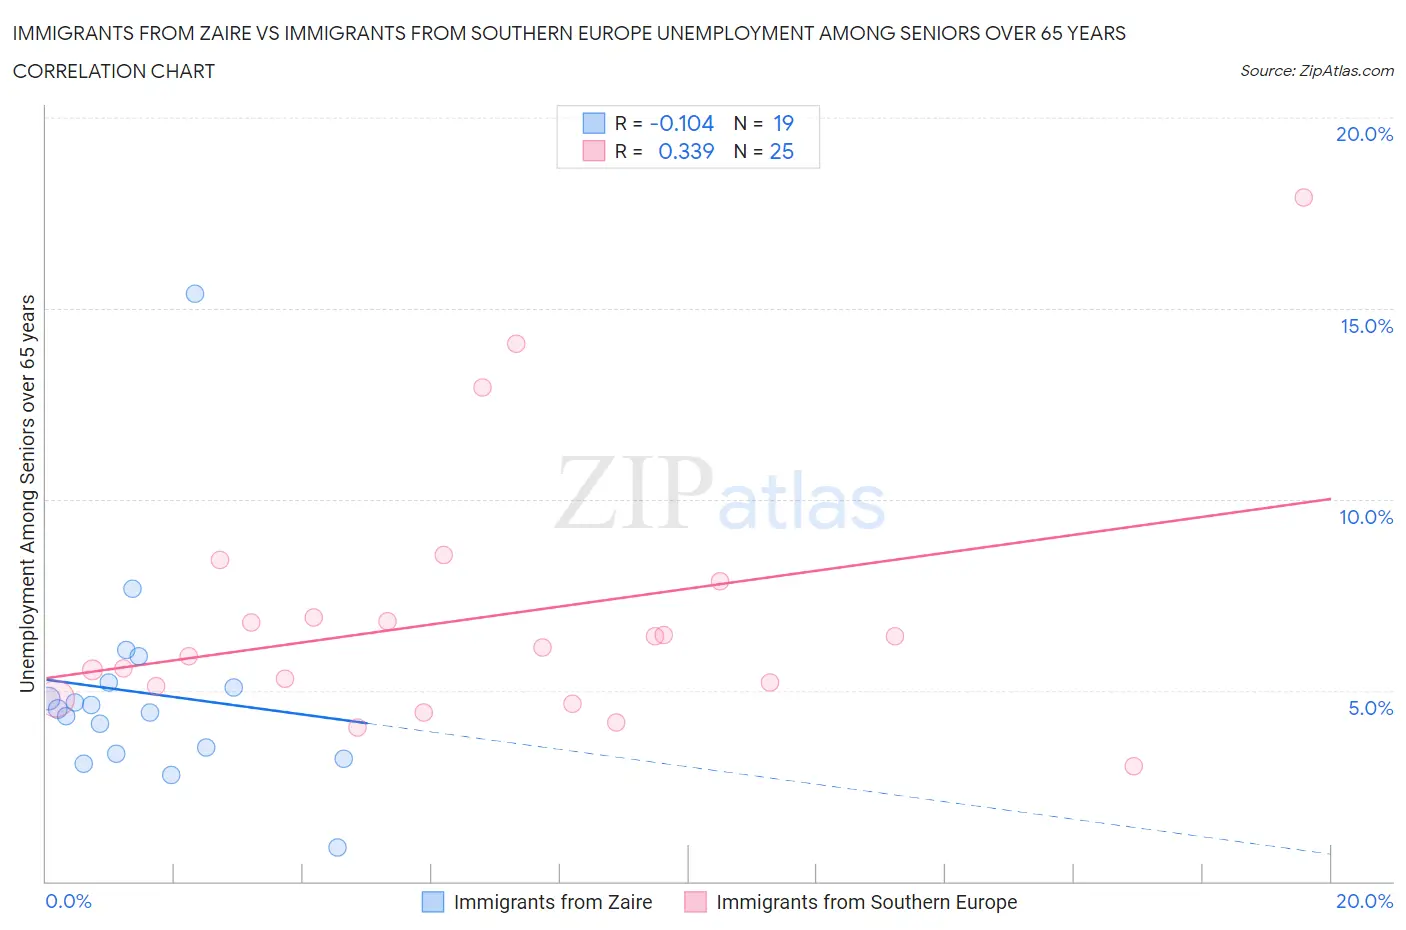 Immigrants from Zaire vs Immigrants from Southern Europe Unemployment Among Seniors over 65 years